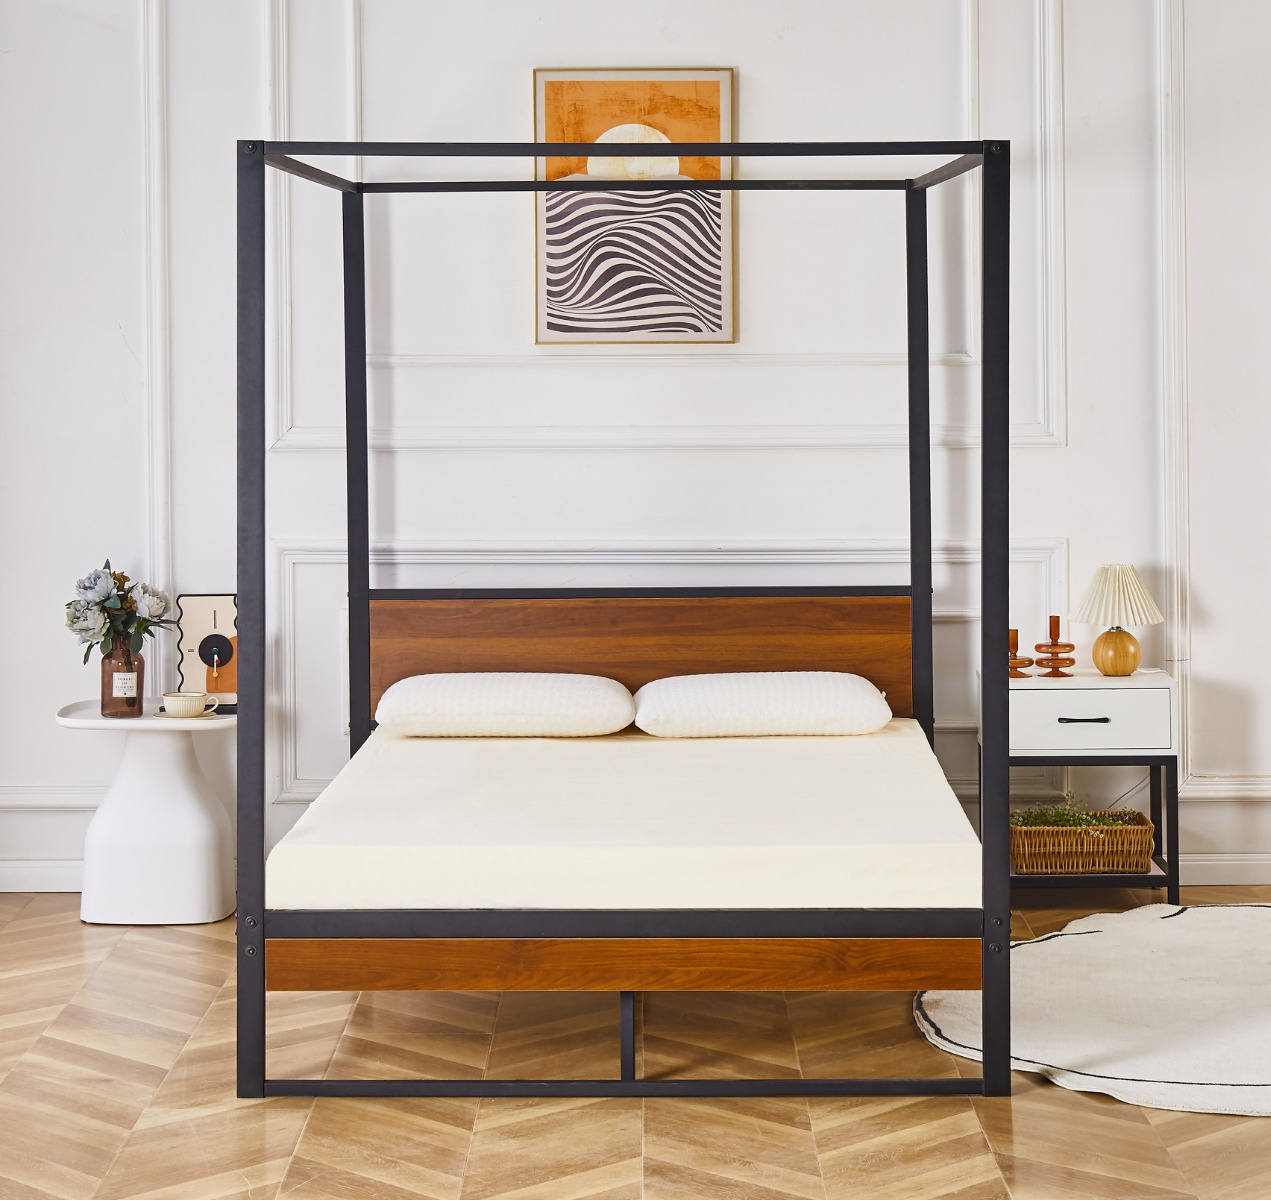 Flair Rockford Wooden Metal 4 Poster Bed Frame